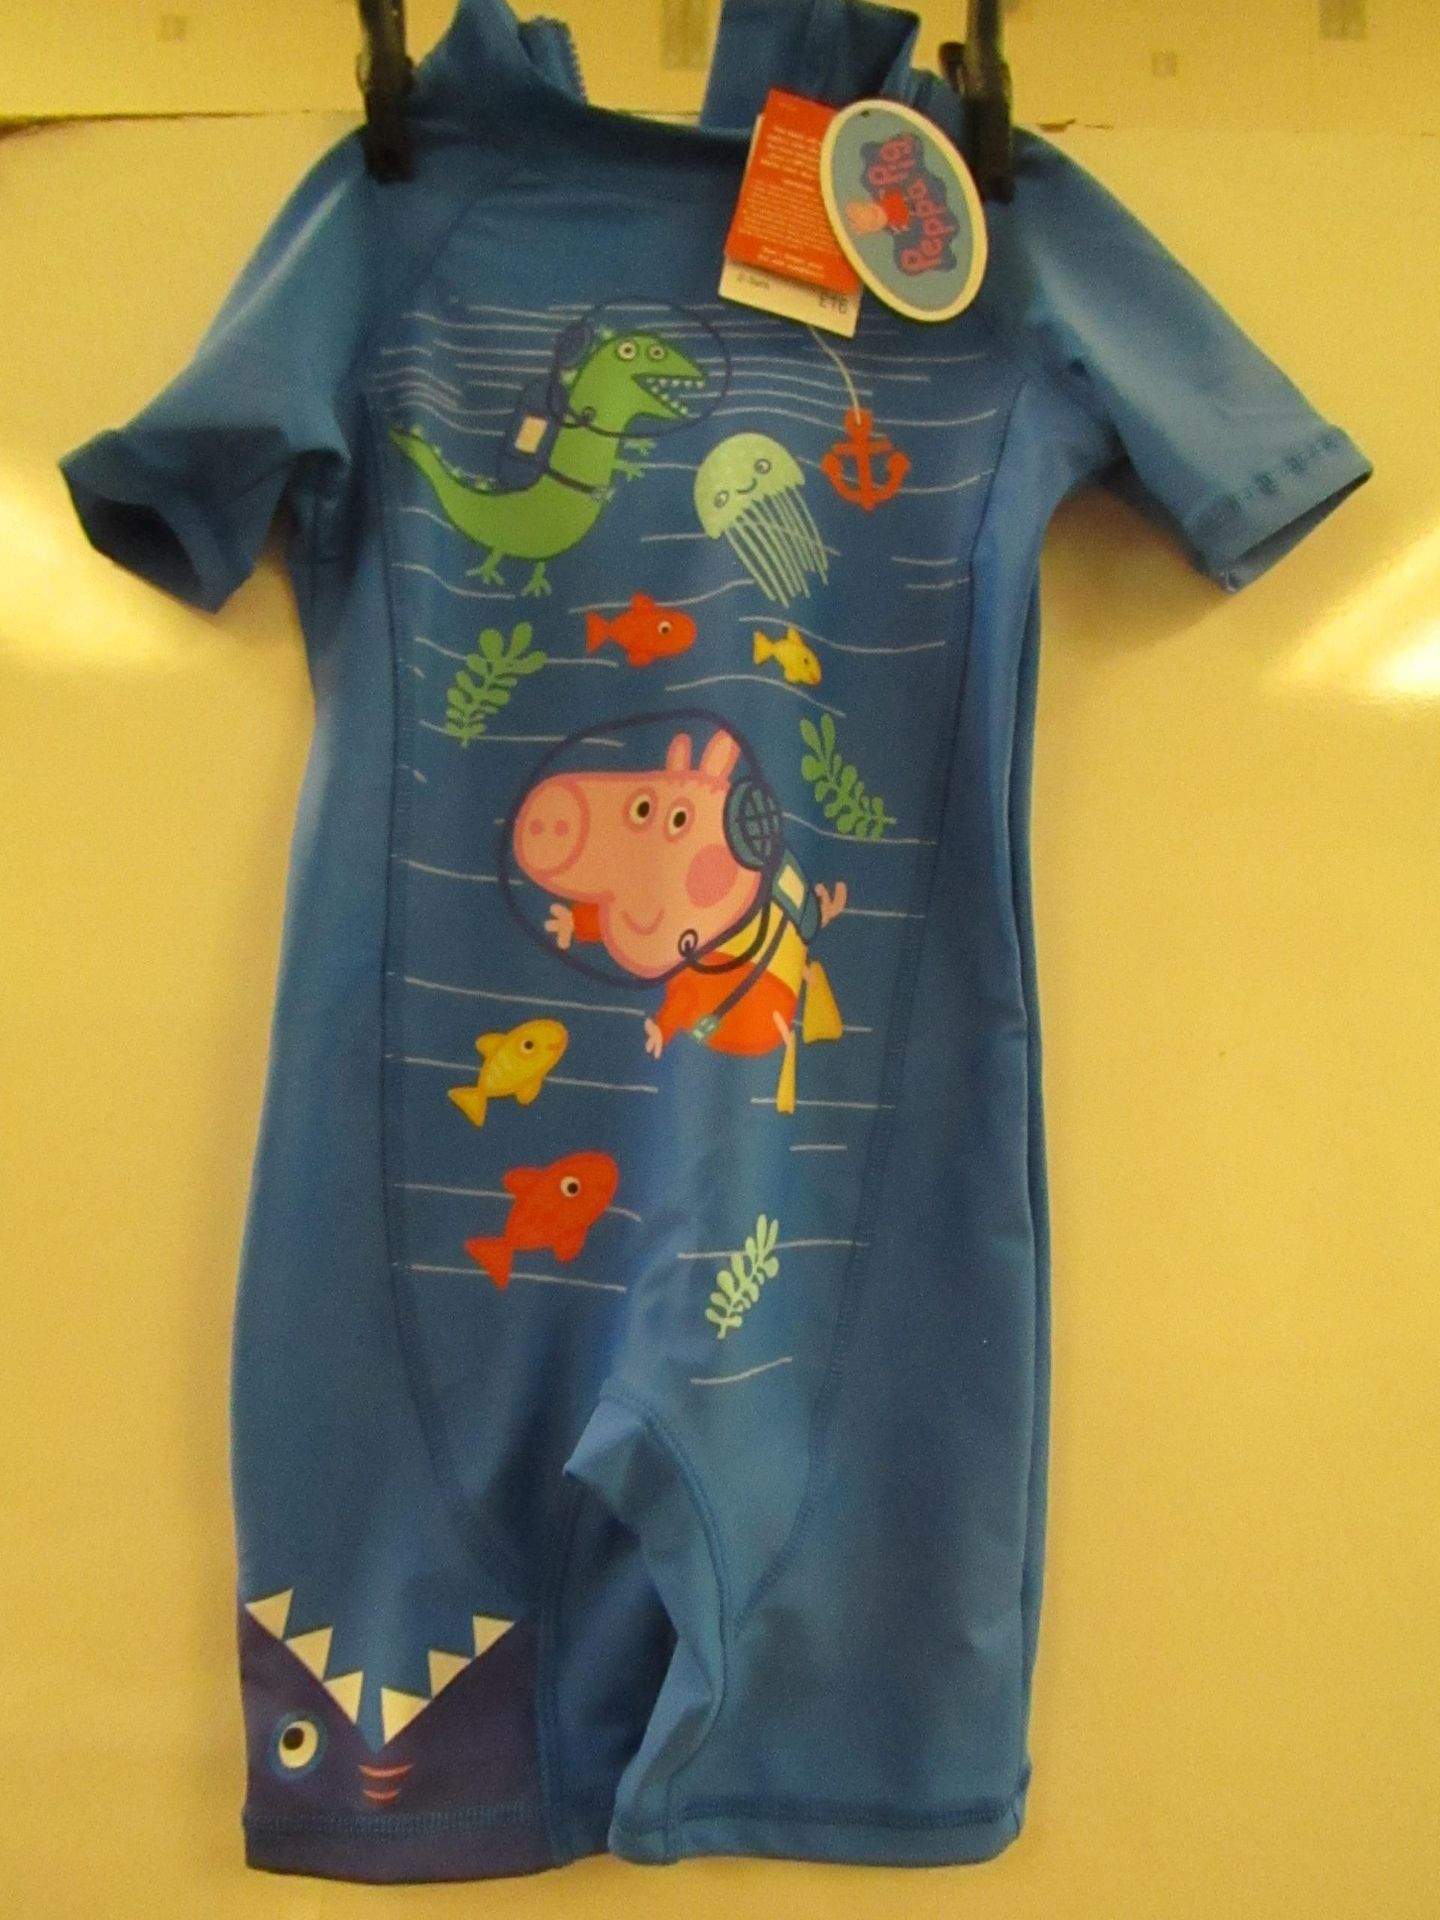 1 x Next Peppa Pig One Piece Swimsuit size 2/3 yrs new with tag